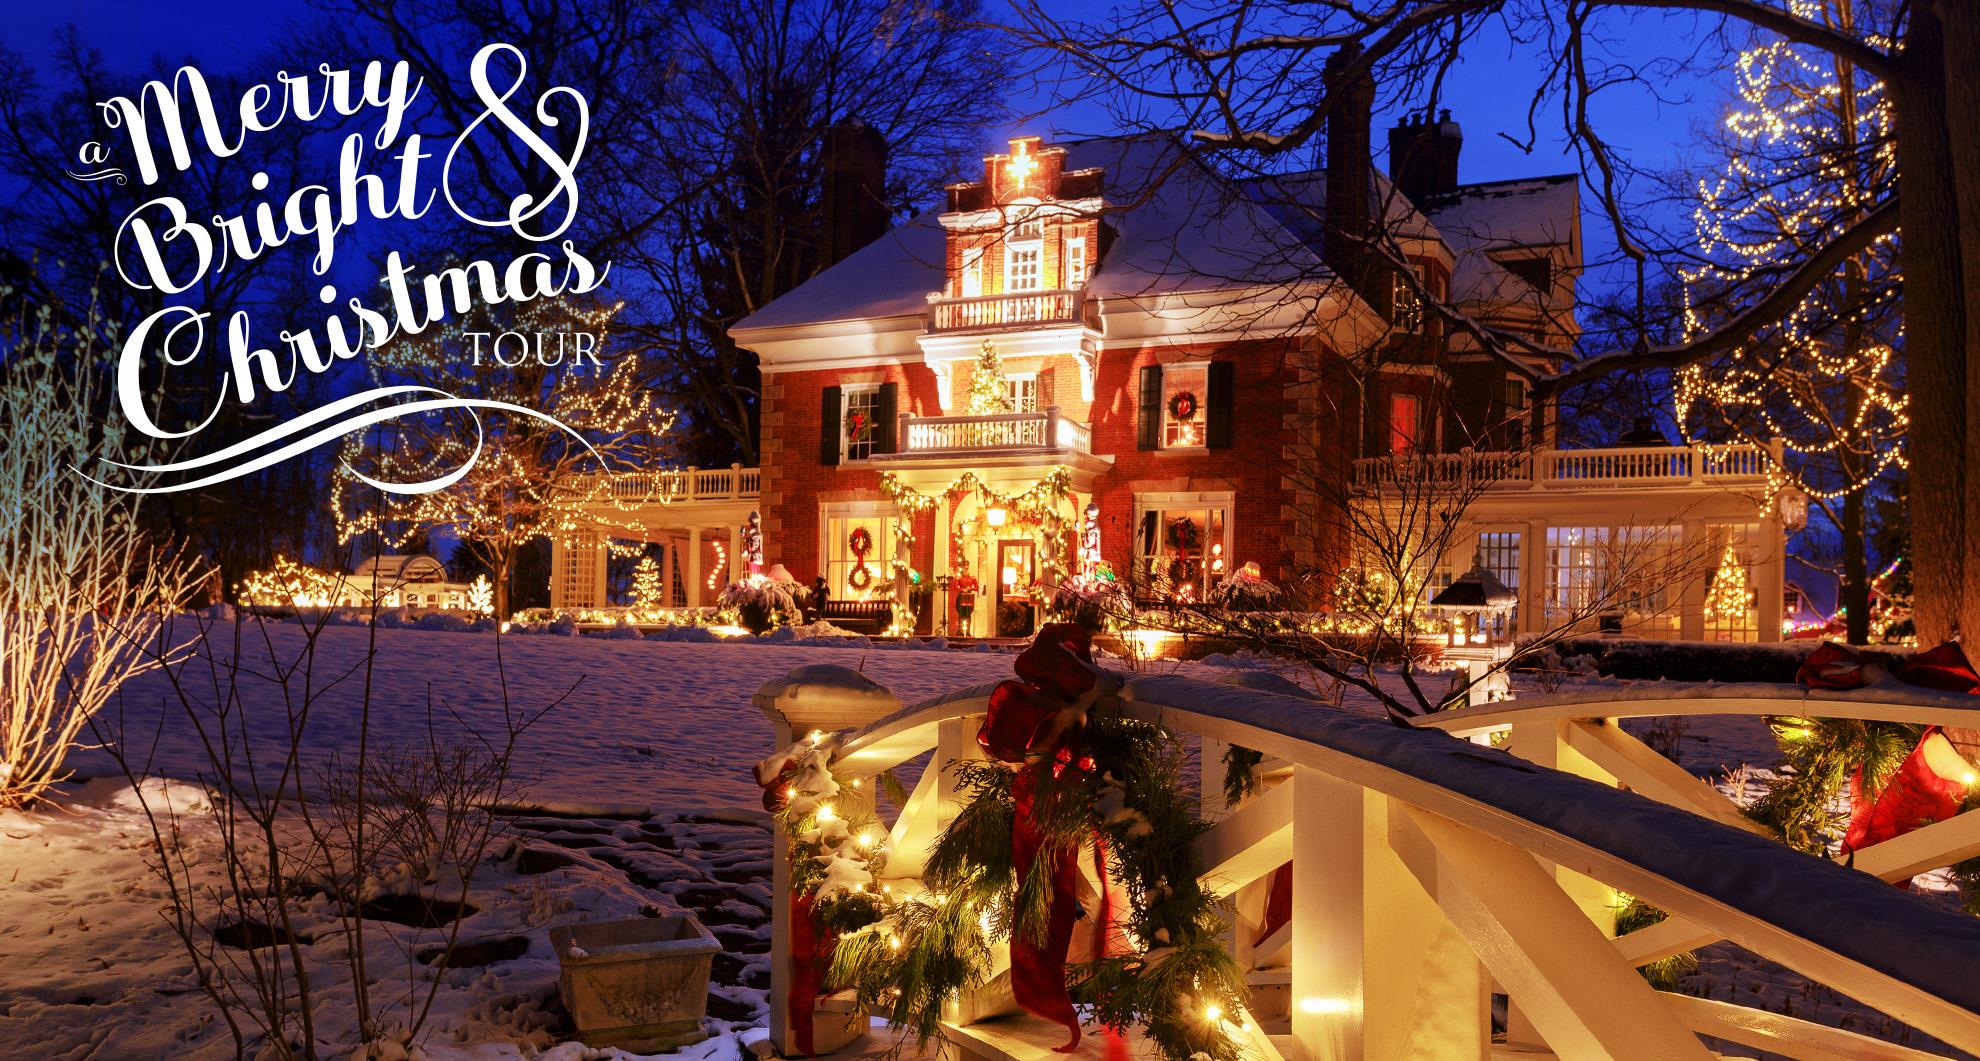 A Candlelight Christmas Evening Tour - Sold Out